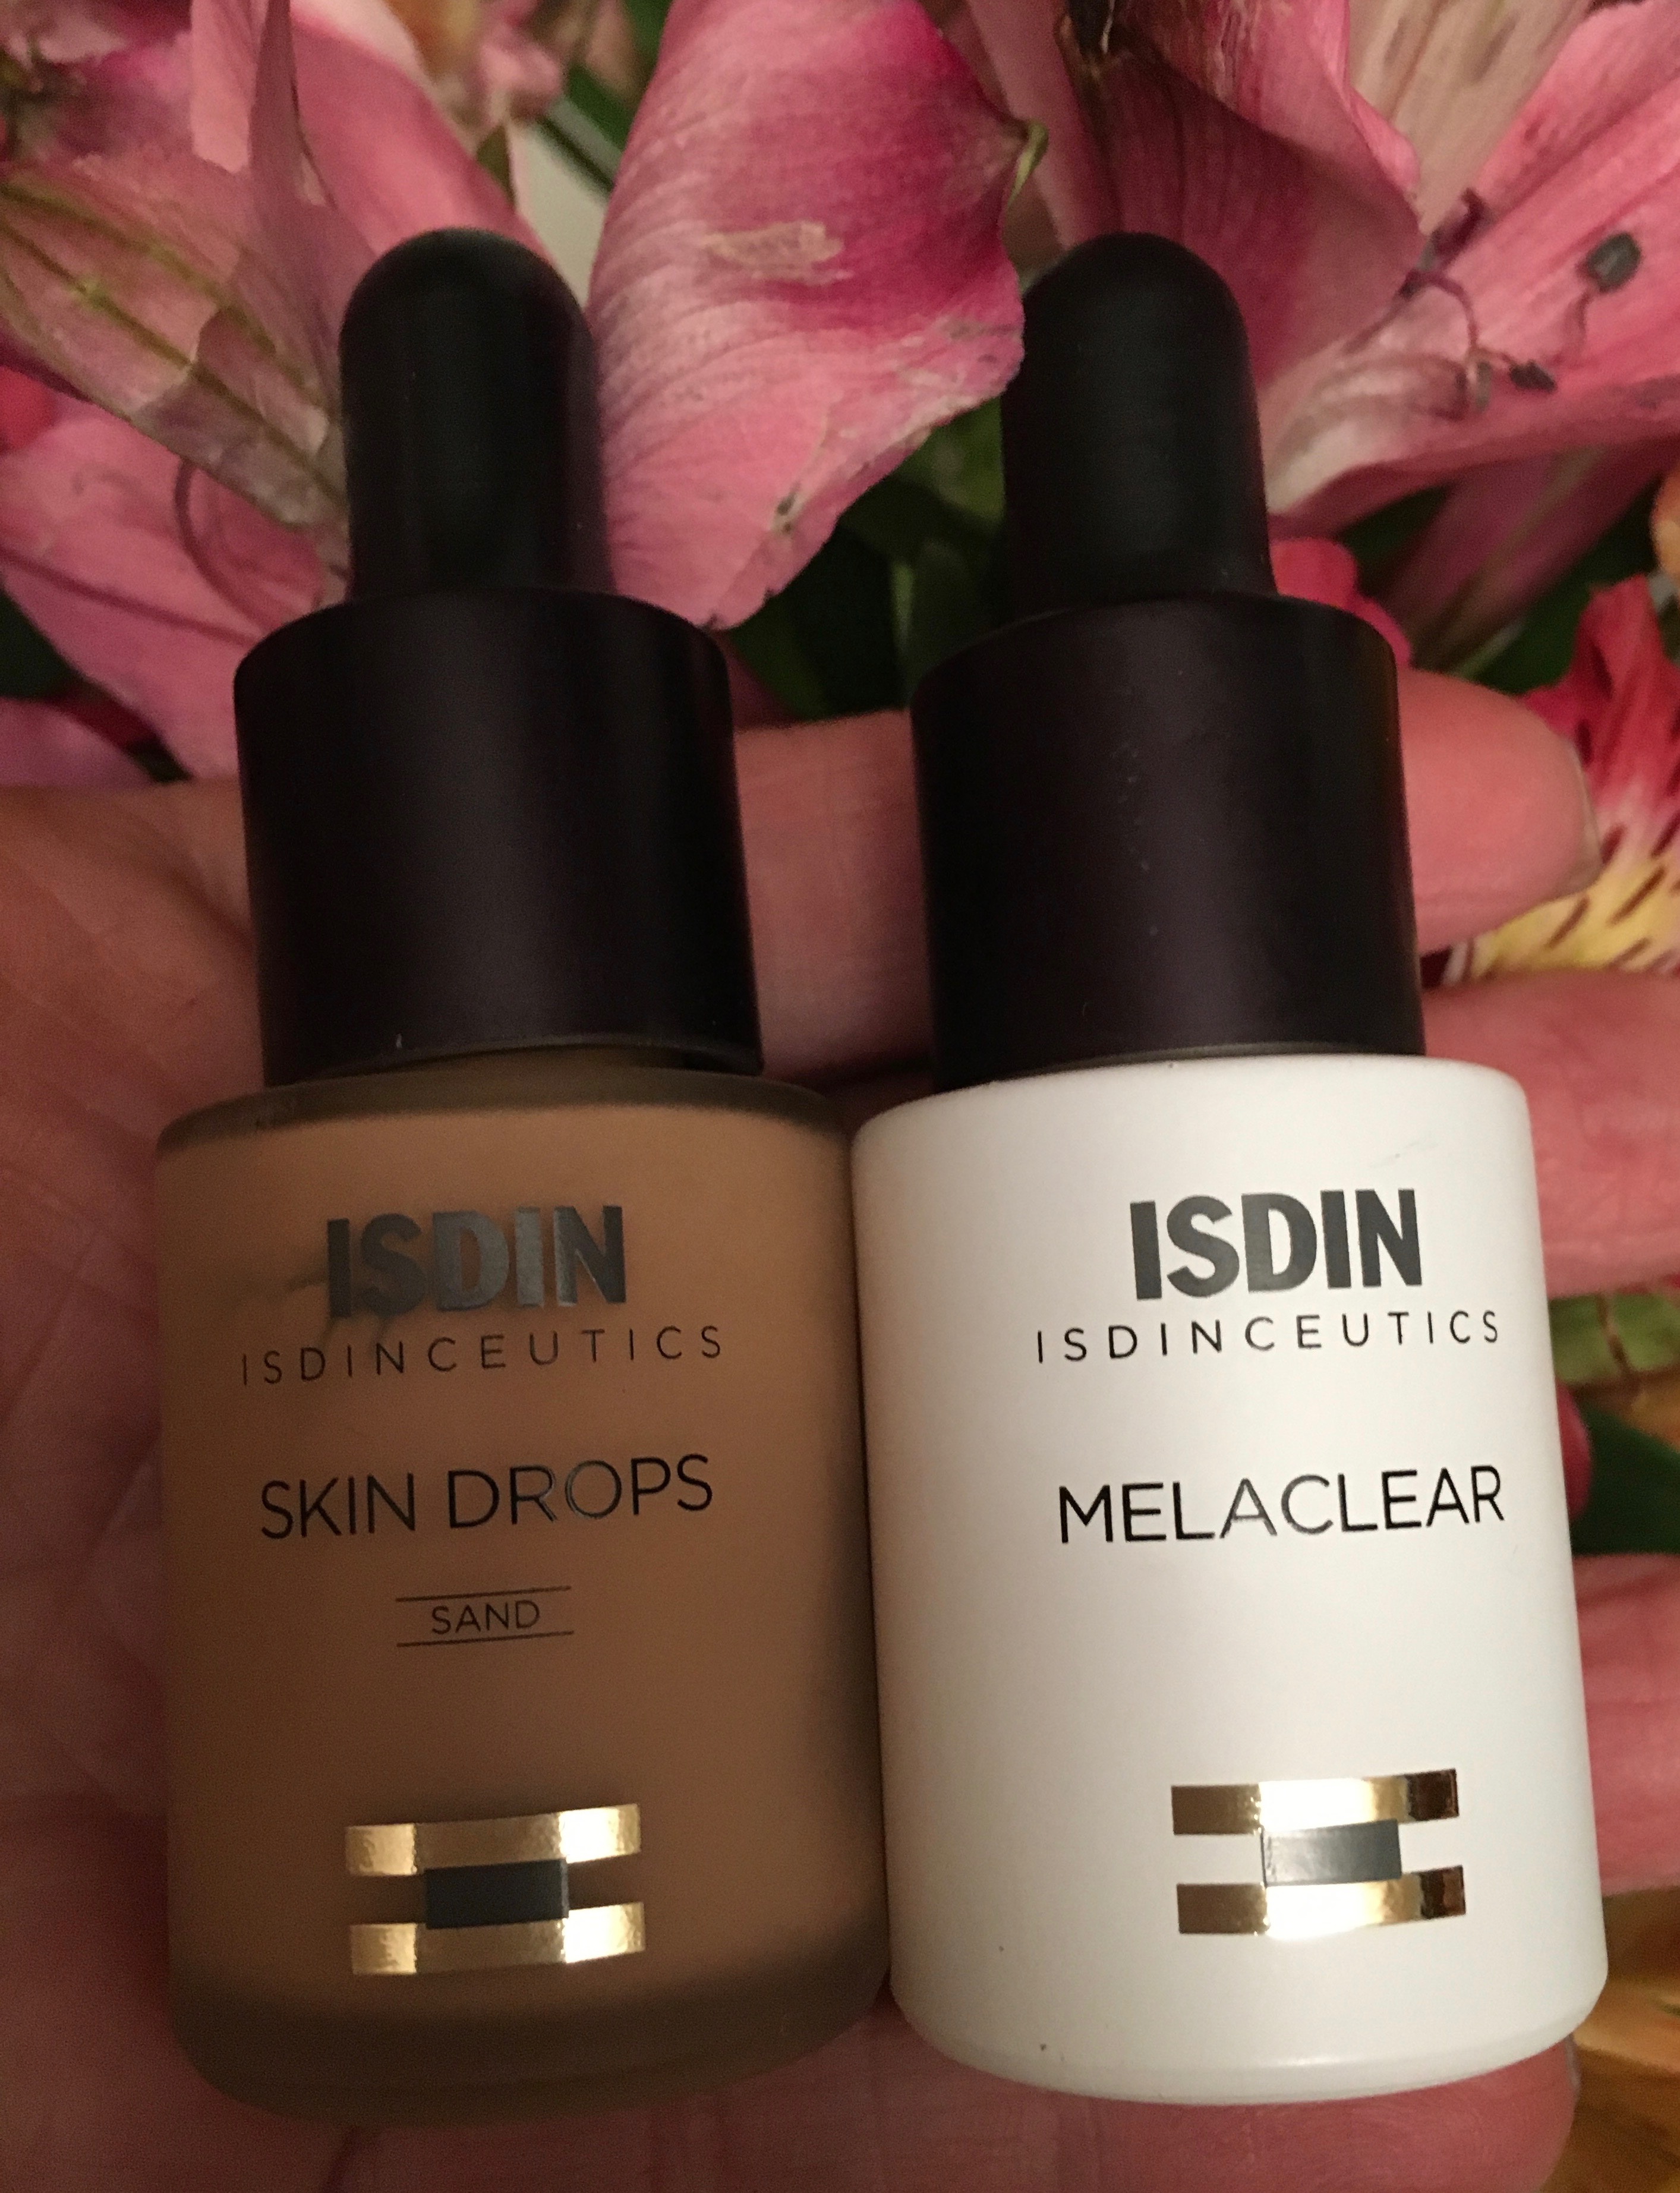 Experience Exquisite skincare from Isdinceutics - It's A Glam Thing